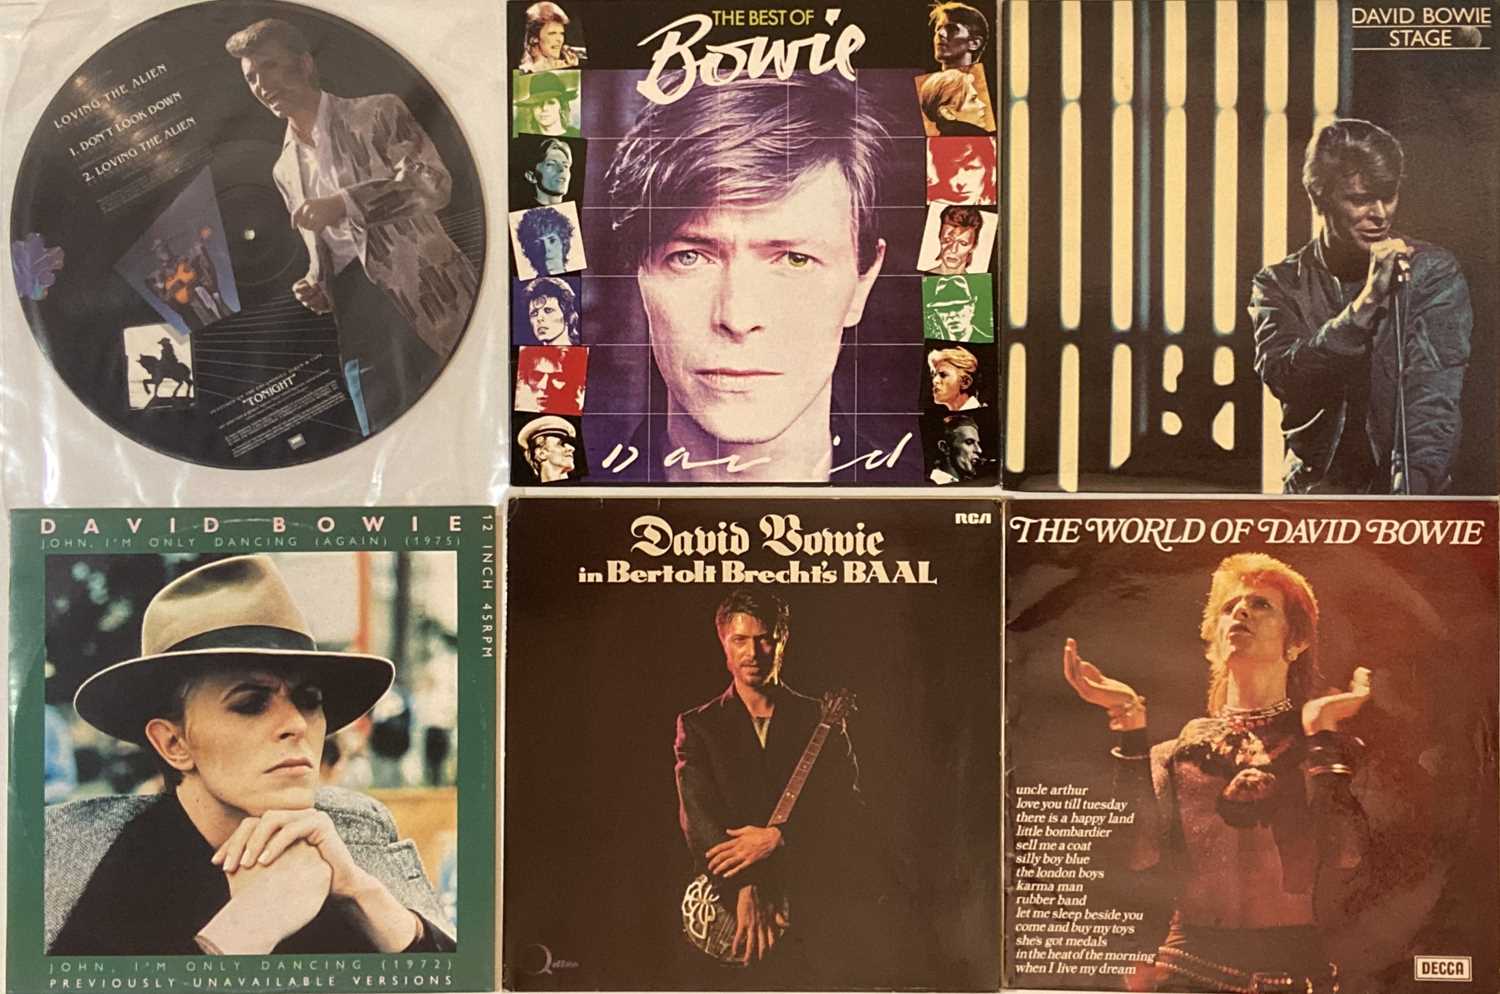 David Bowie - LP/12" Collection - Image 2 of 3